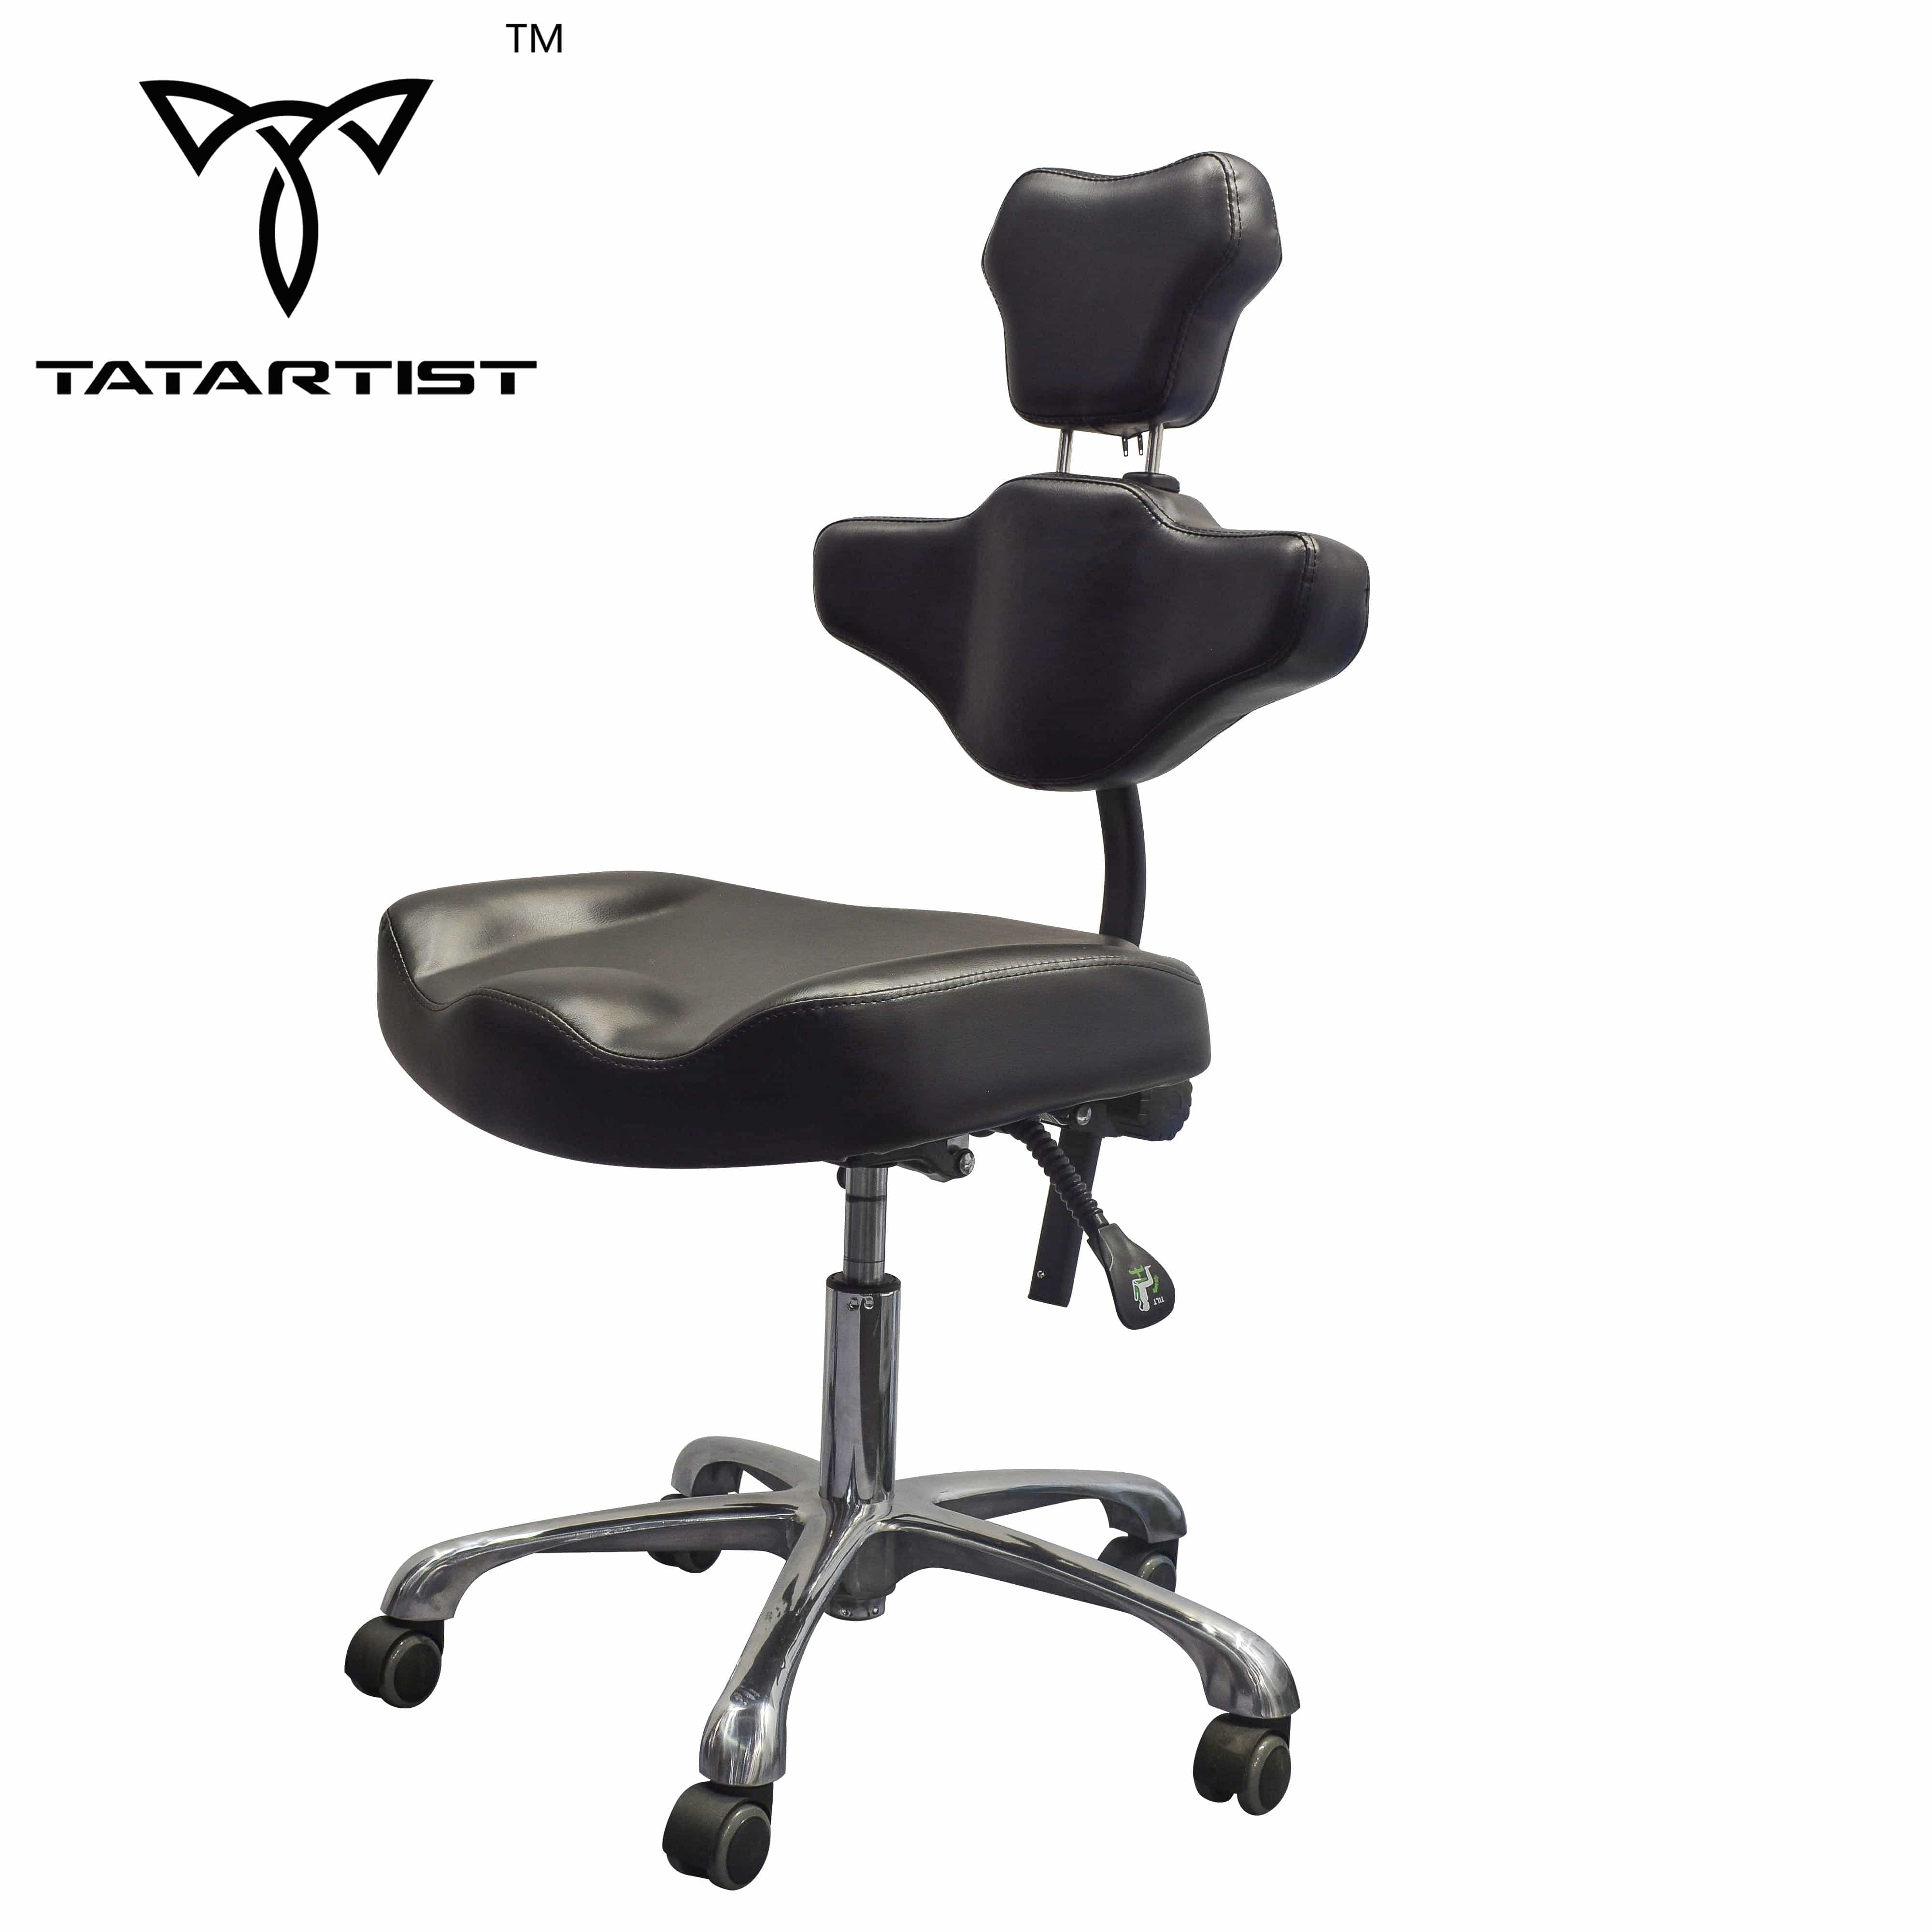 【USA】Hydraulic tattoo client chair adjustable artist chair footrest Tattoo Studio Furniture Packages